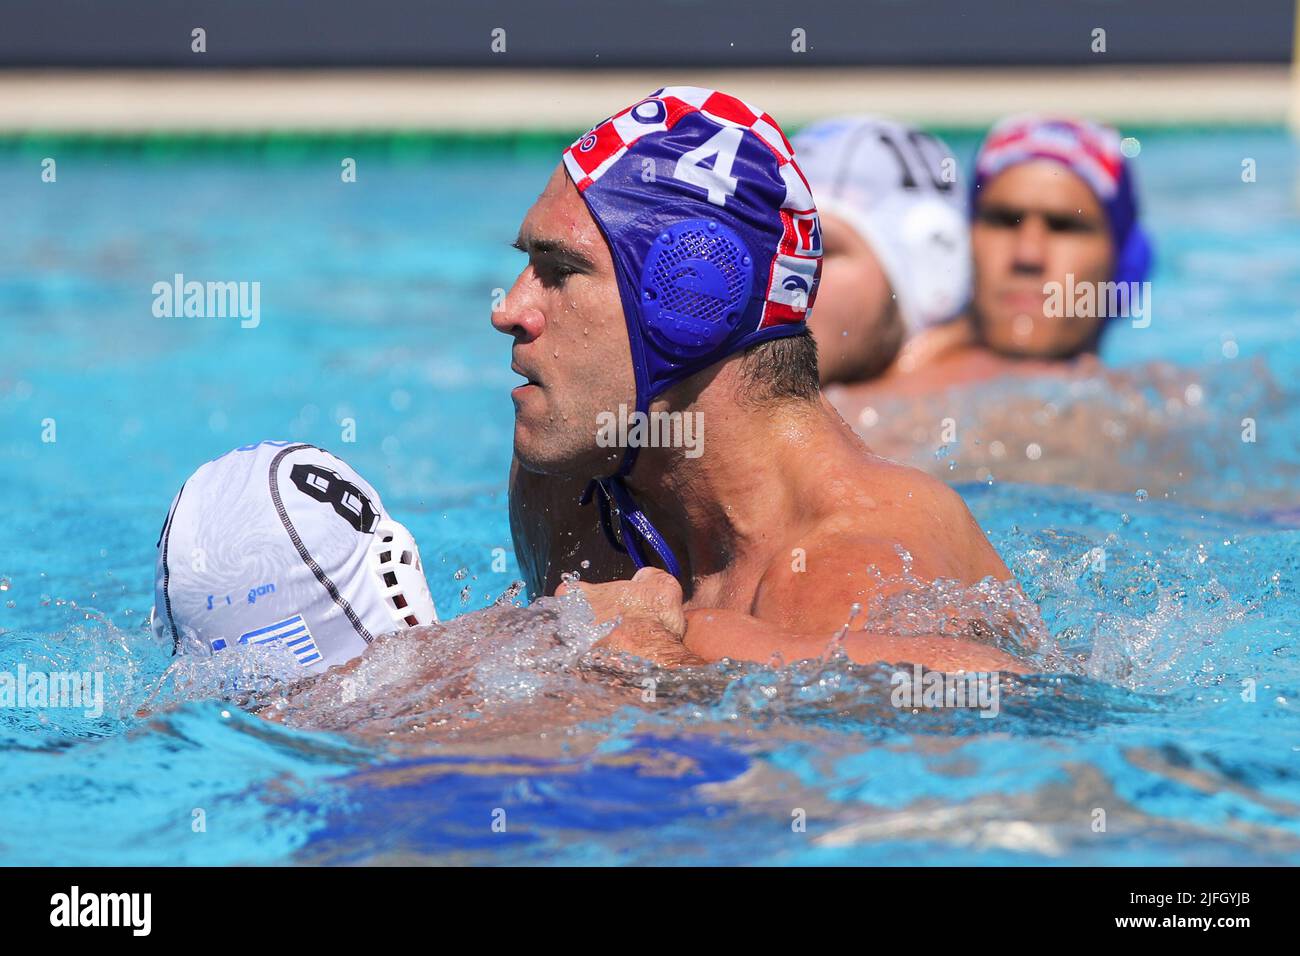 BUDAPEST, HUNGARY - JULY 3: Stylianos Argyropoulos Kanakakis of Greece and Ivan Krapic of Croatia during the FINA World Championships Budapest 2022 Bronze medal match between Greece and Croatia on July 3, 2022 in Budapest, Hungary (Photo by Albert ten Hove/Orange Pictures) Stock Photo